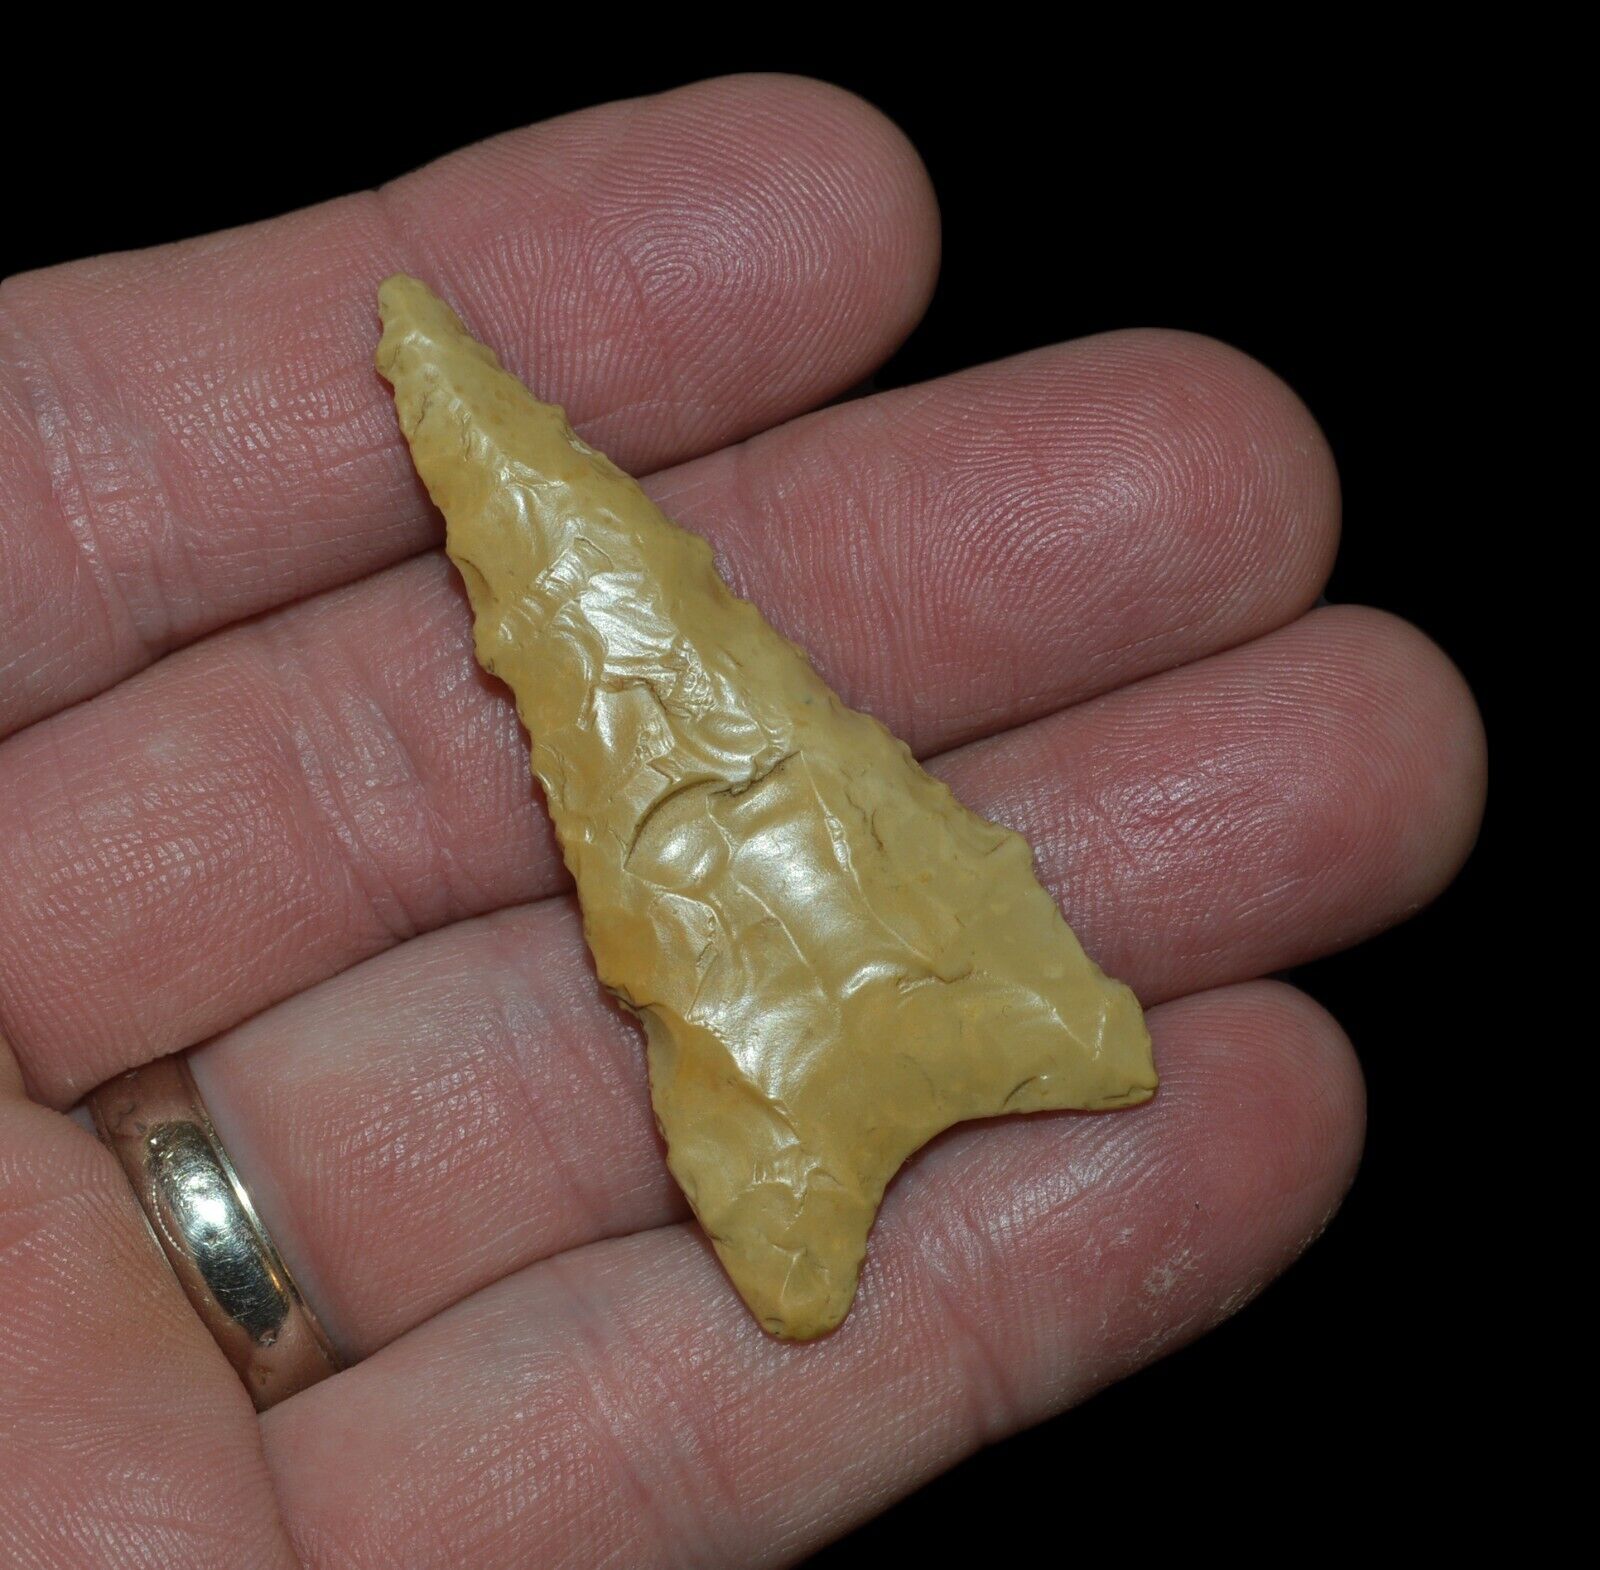 DALTON ST CHARLES CO MO AUTHENTIC INDIAN ARROWHEAD ARTIFACT COLLECTIBLE RELIC